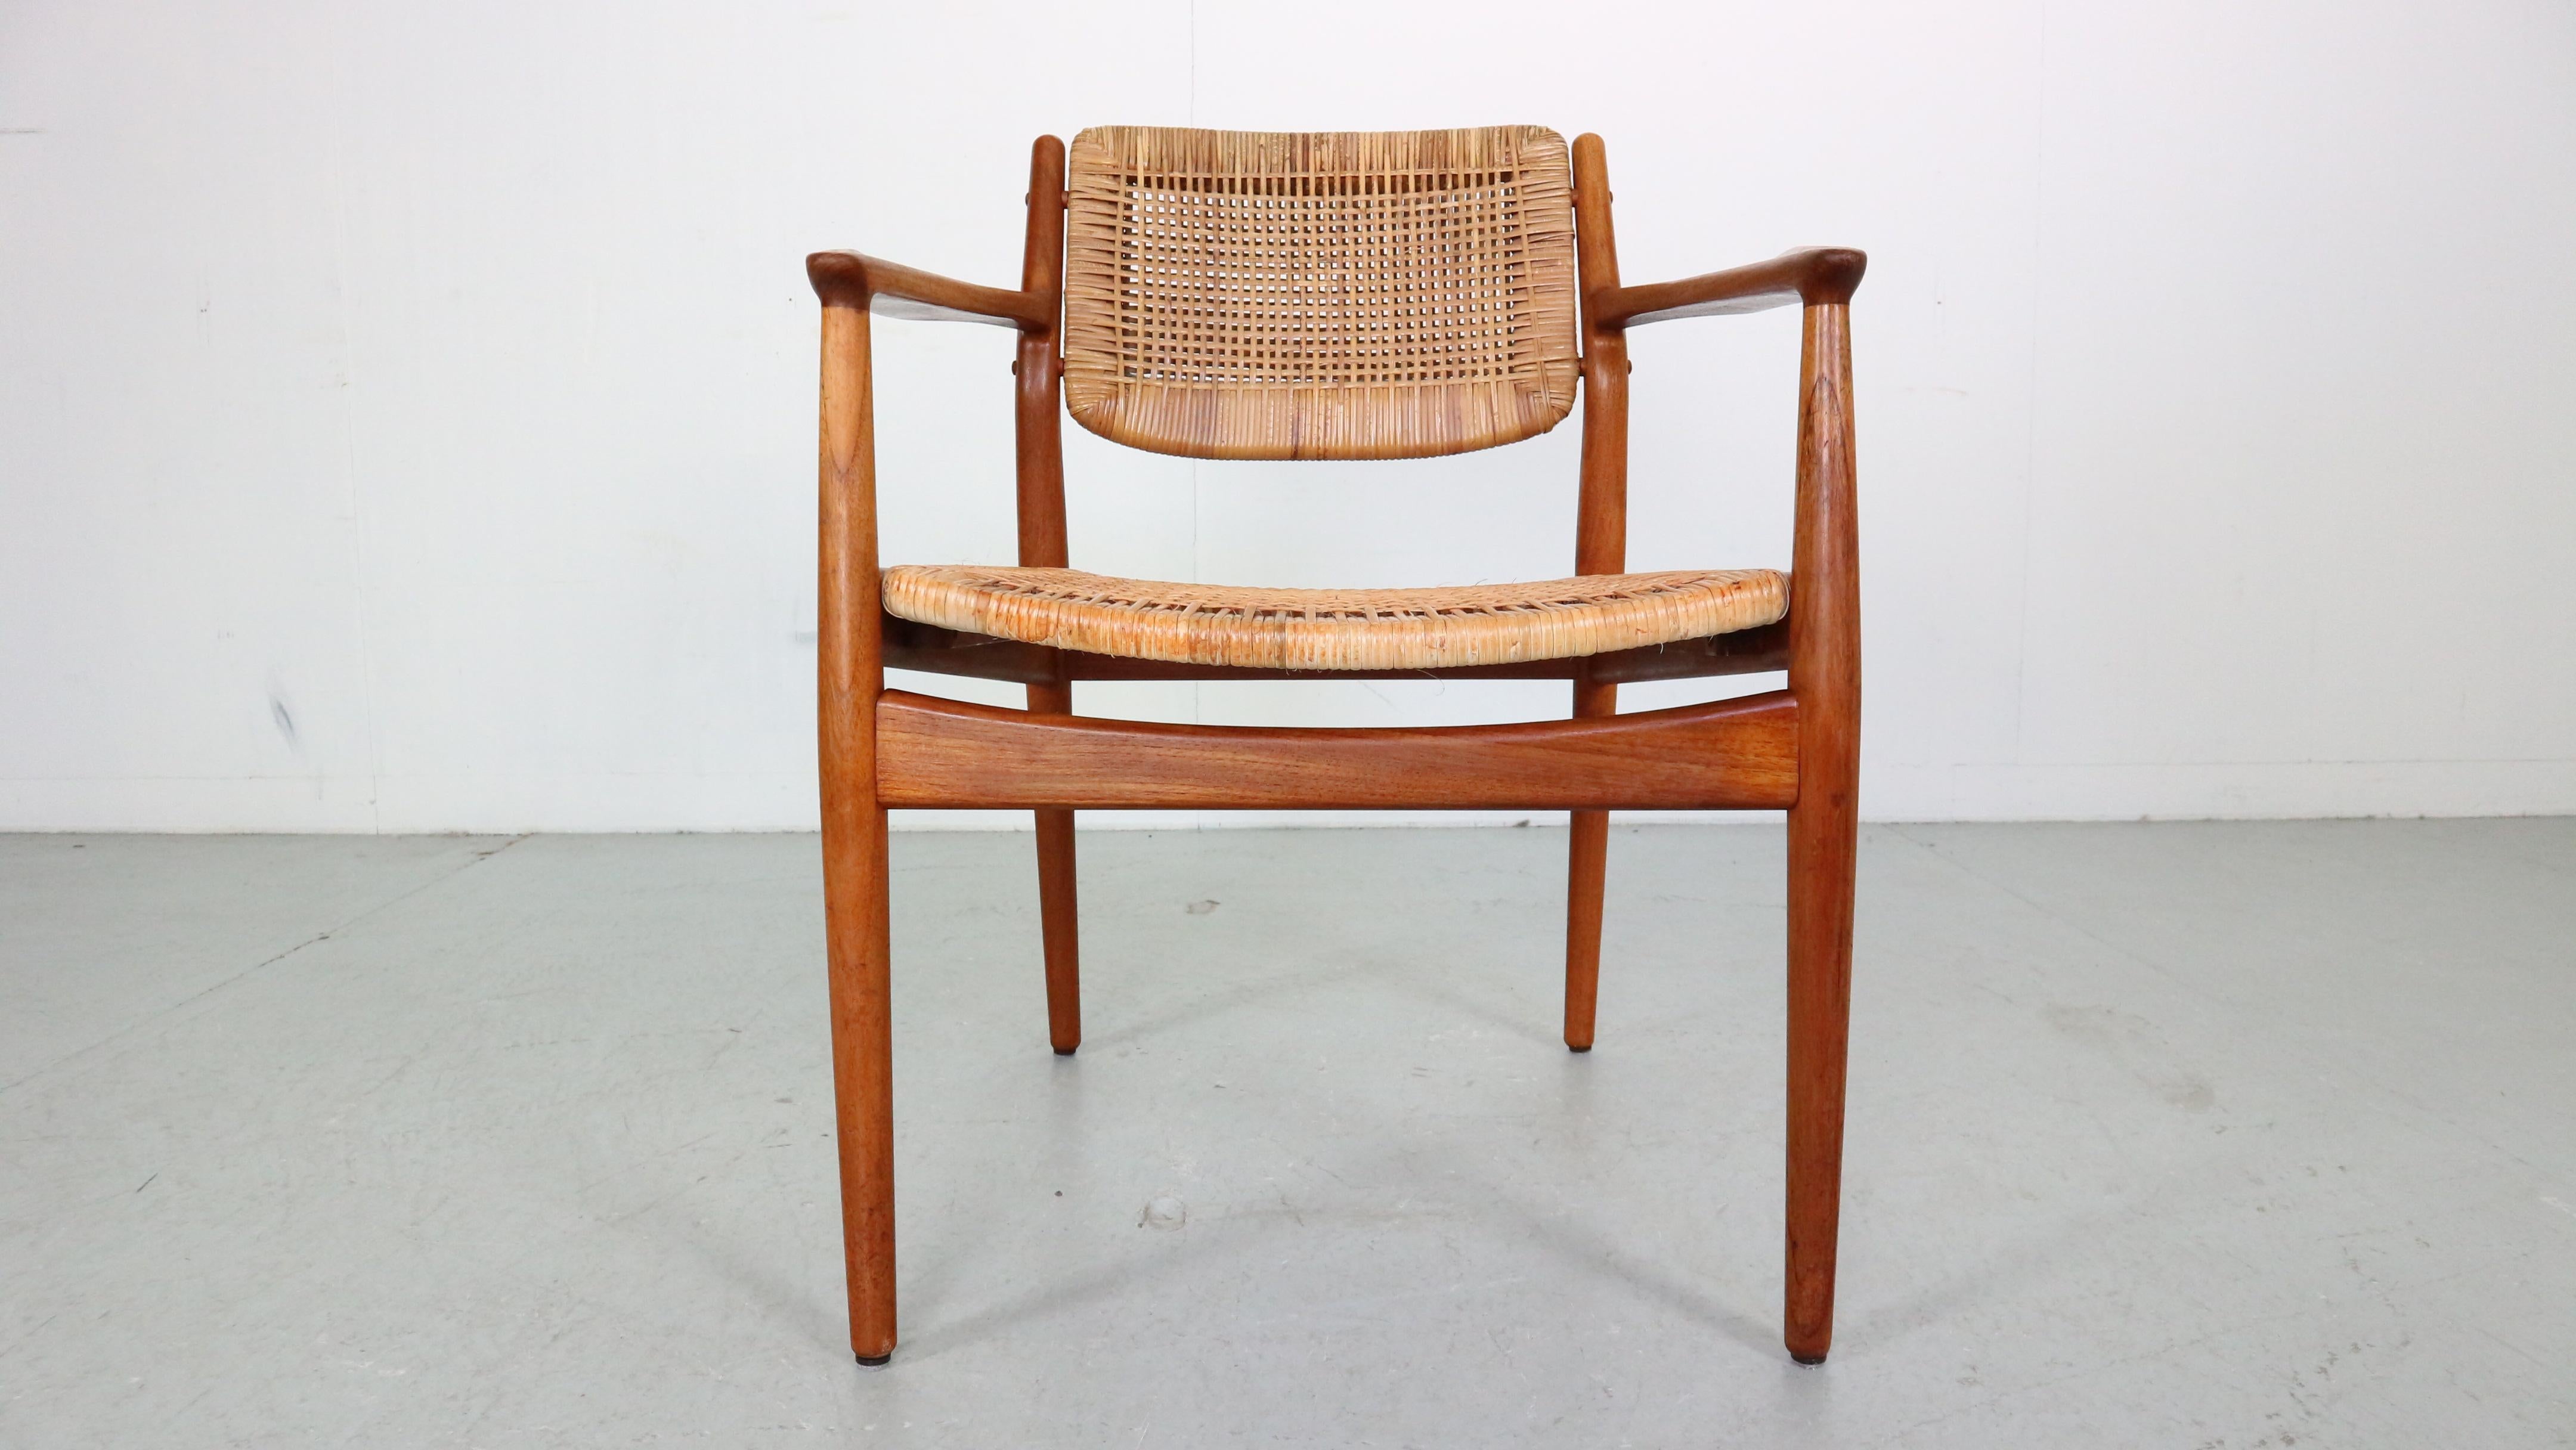 Rare vintage Danish design teak/rattan chair designed by Arne Vodder for Sibast Furniture in the 1950s. Arne Vodder was trained by Finn Juhl and eventually became his business partner. He studied under Juhl at the Royal Danish Academy of Fine Arts